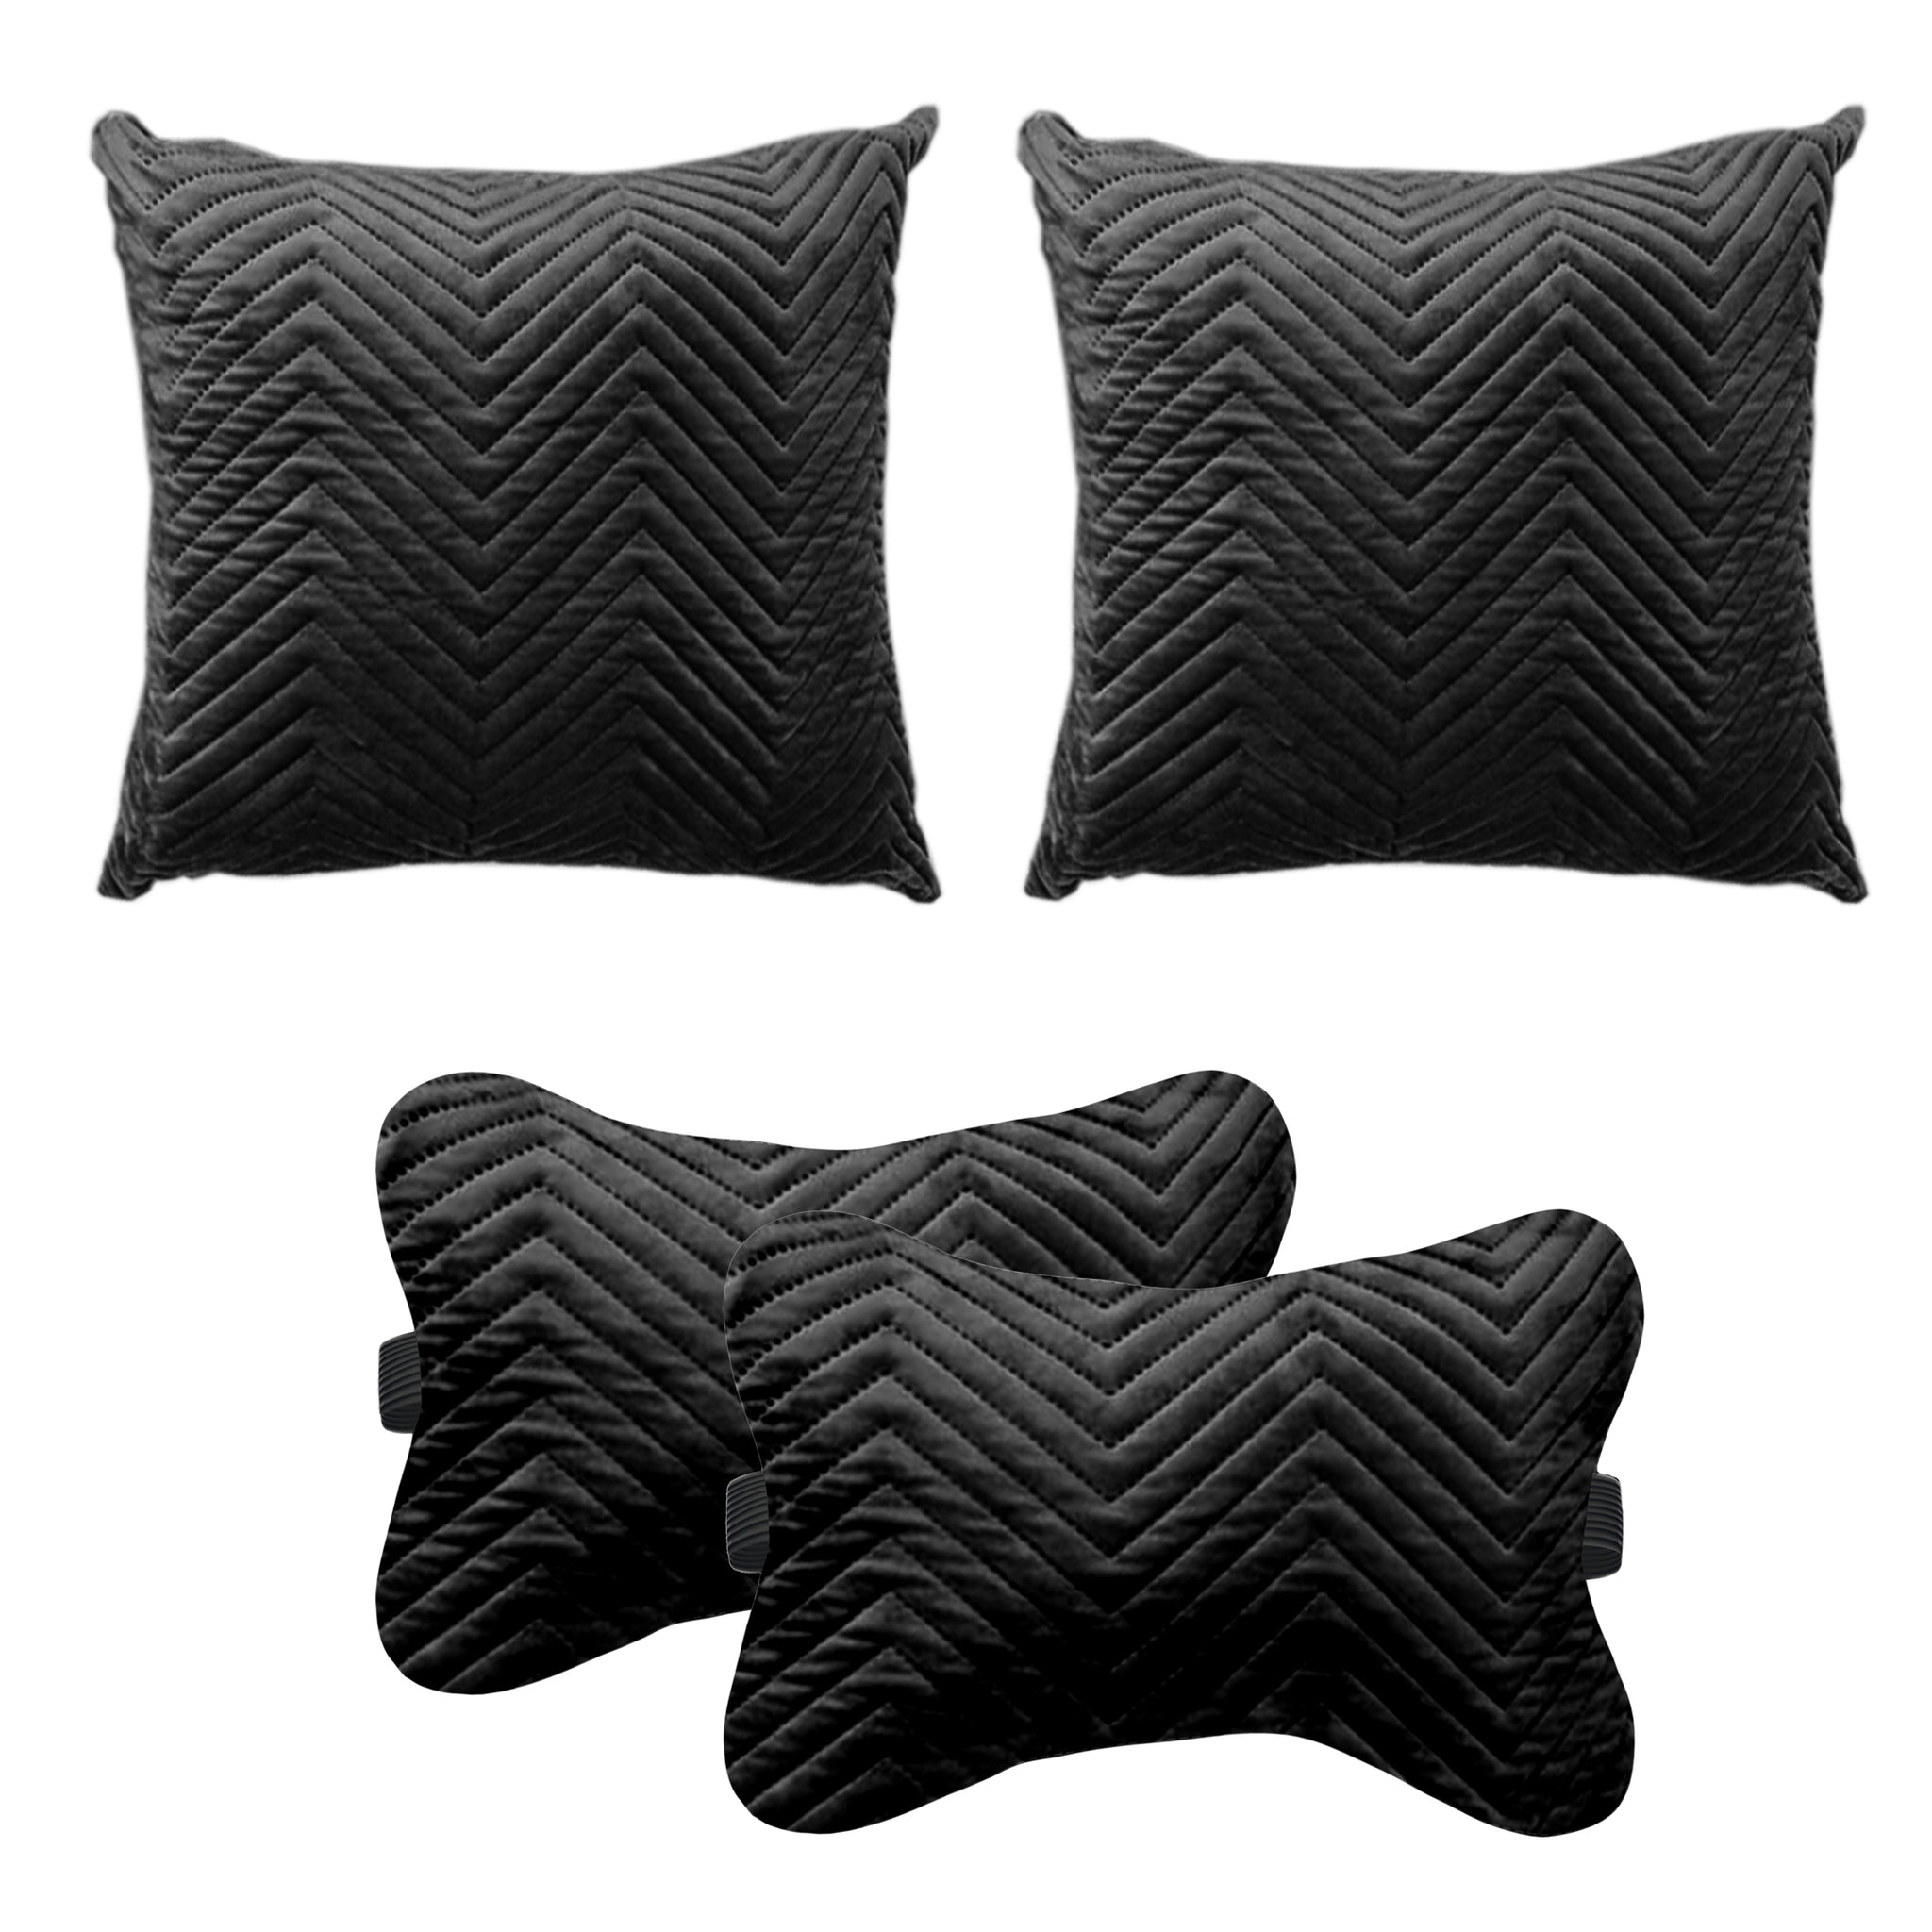 Car Cushion Pillows for Neck, Back and Seat Rest, Pack of 4, Quilted Black Velvet Material, 2 PCs of Bone Neck Rest Size: 6x10 Inches, 2 Pcs of Car Cushion Size: 12x12 Inches by Lushomes